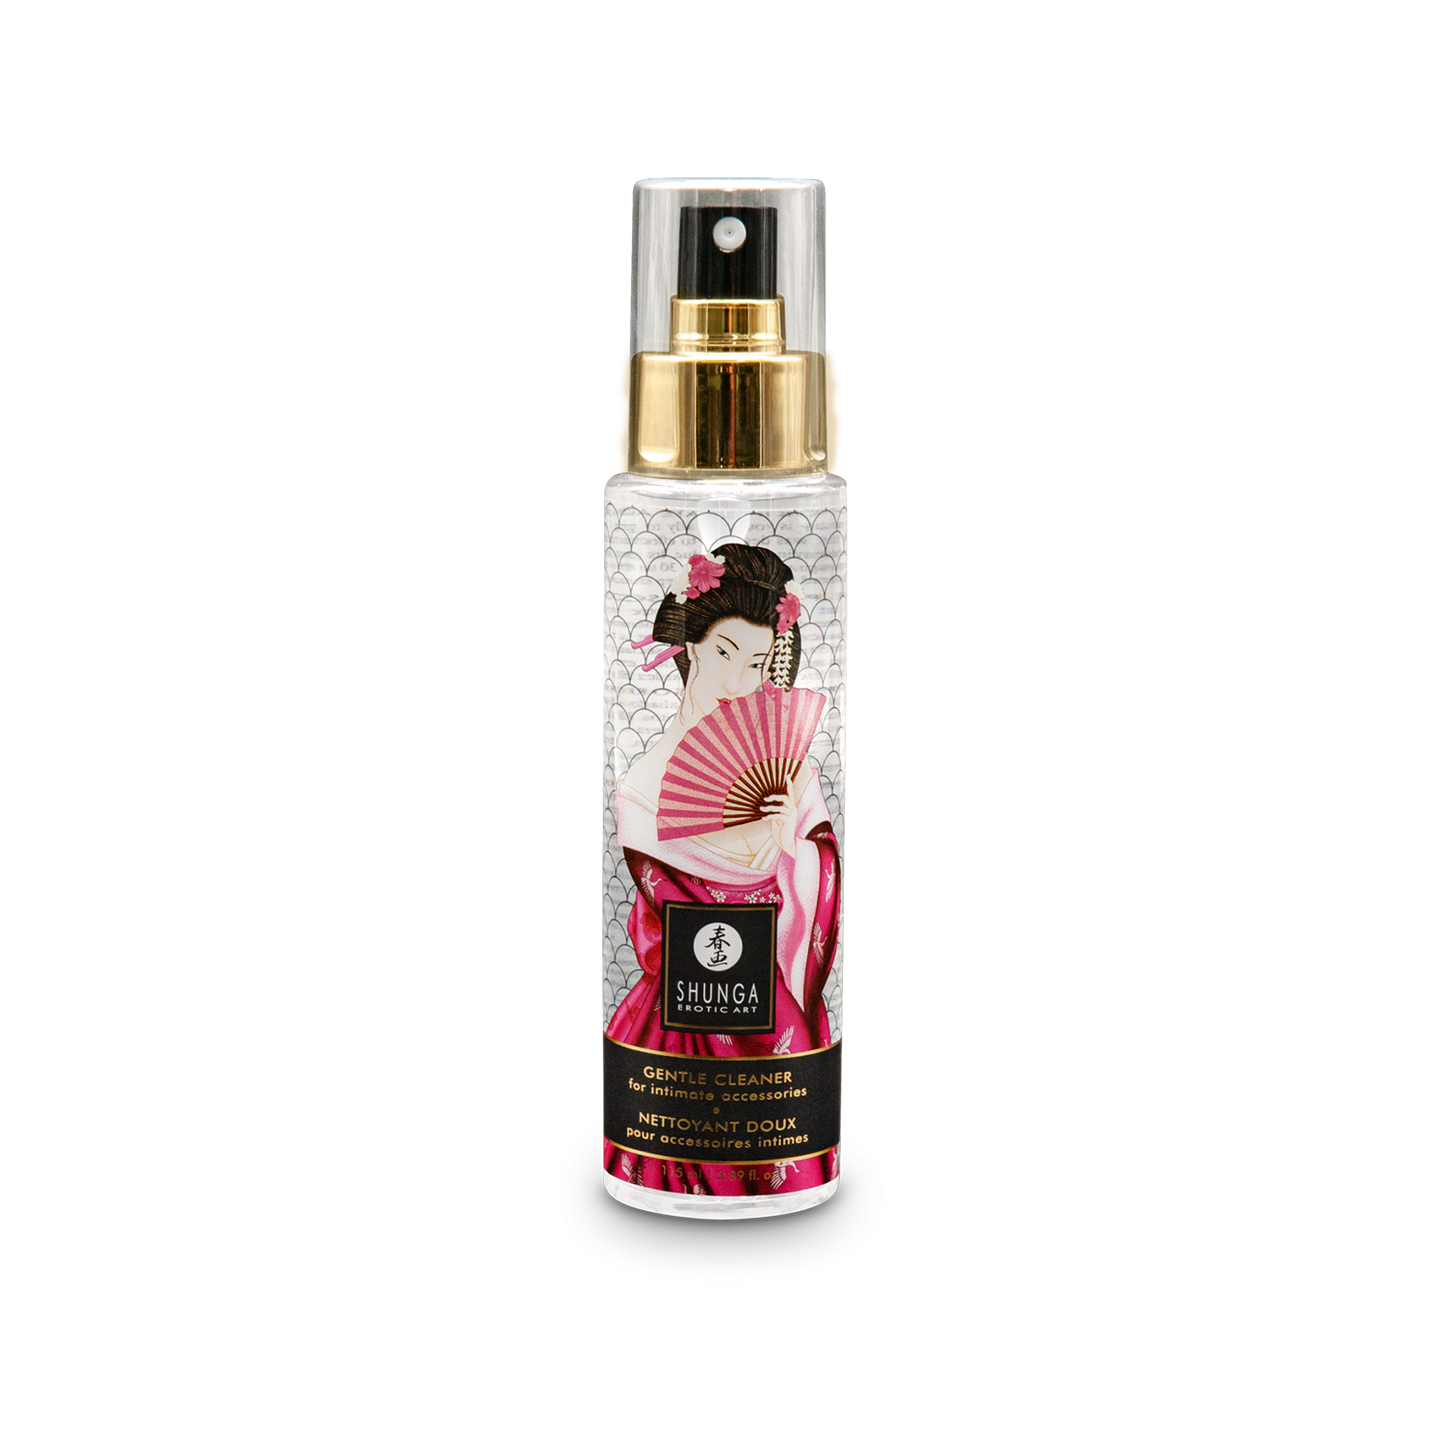 Shunga Gentle Toy Cleaner - 115mL/3.89 fl.oz - Thorn & Feather